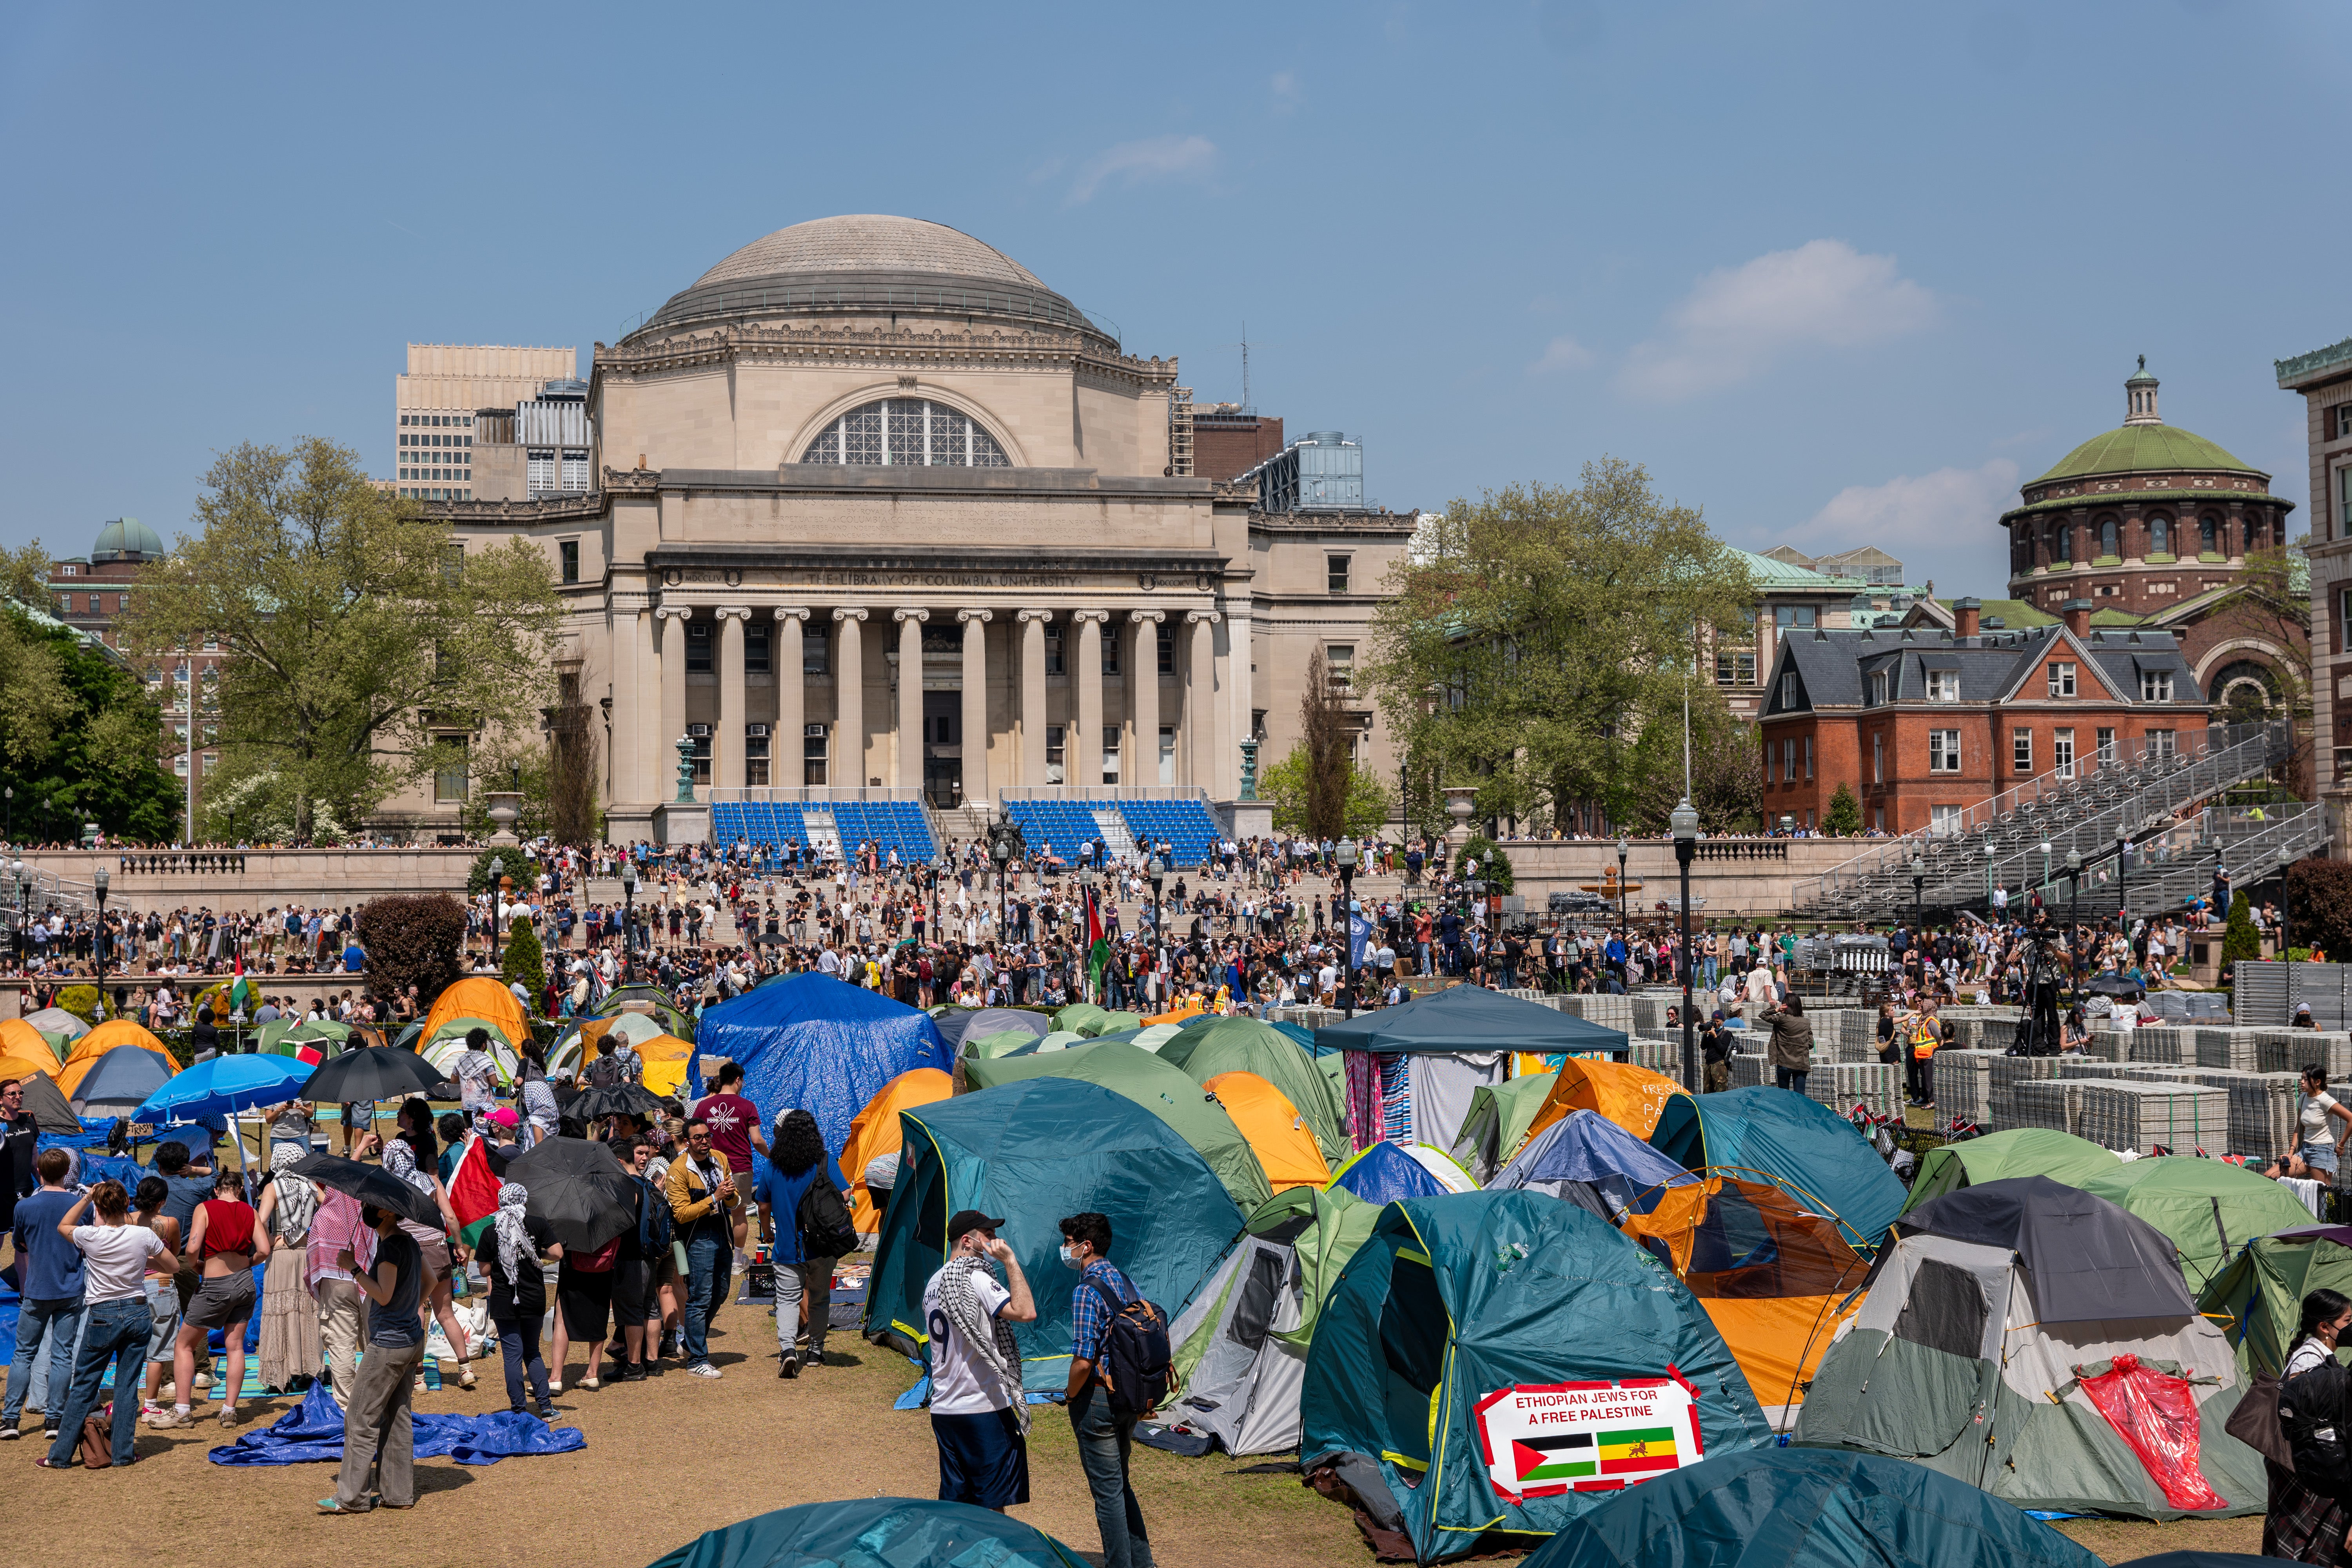 Columbia University issued a notice to protesters asking them to disband their encampment after negotiations failed to come to a resolution